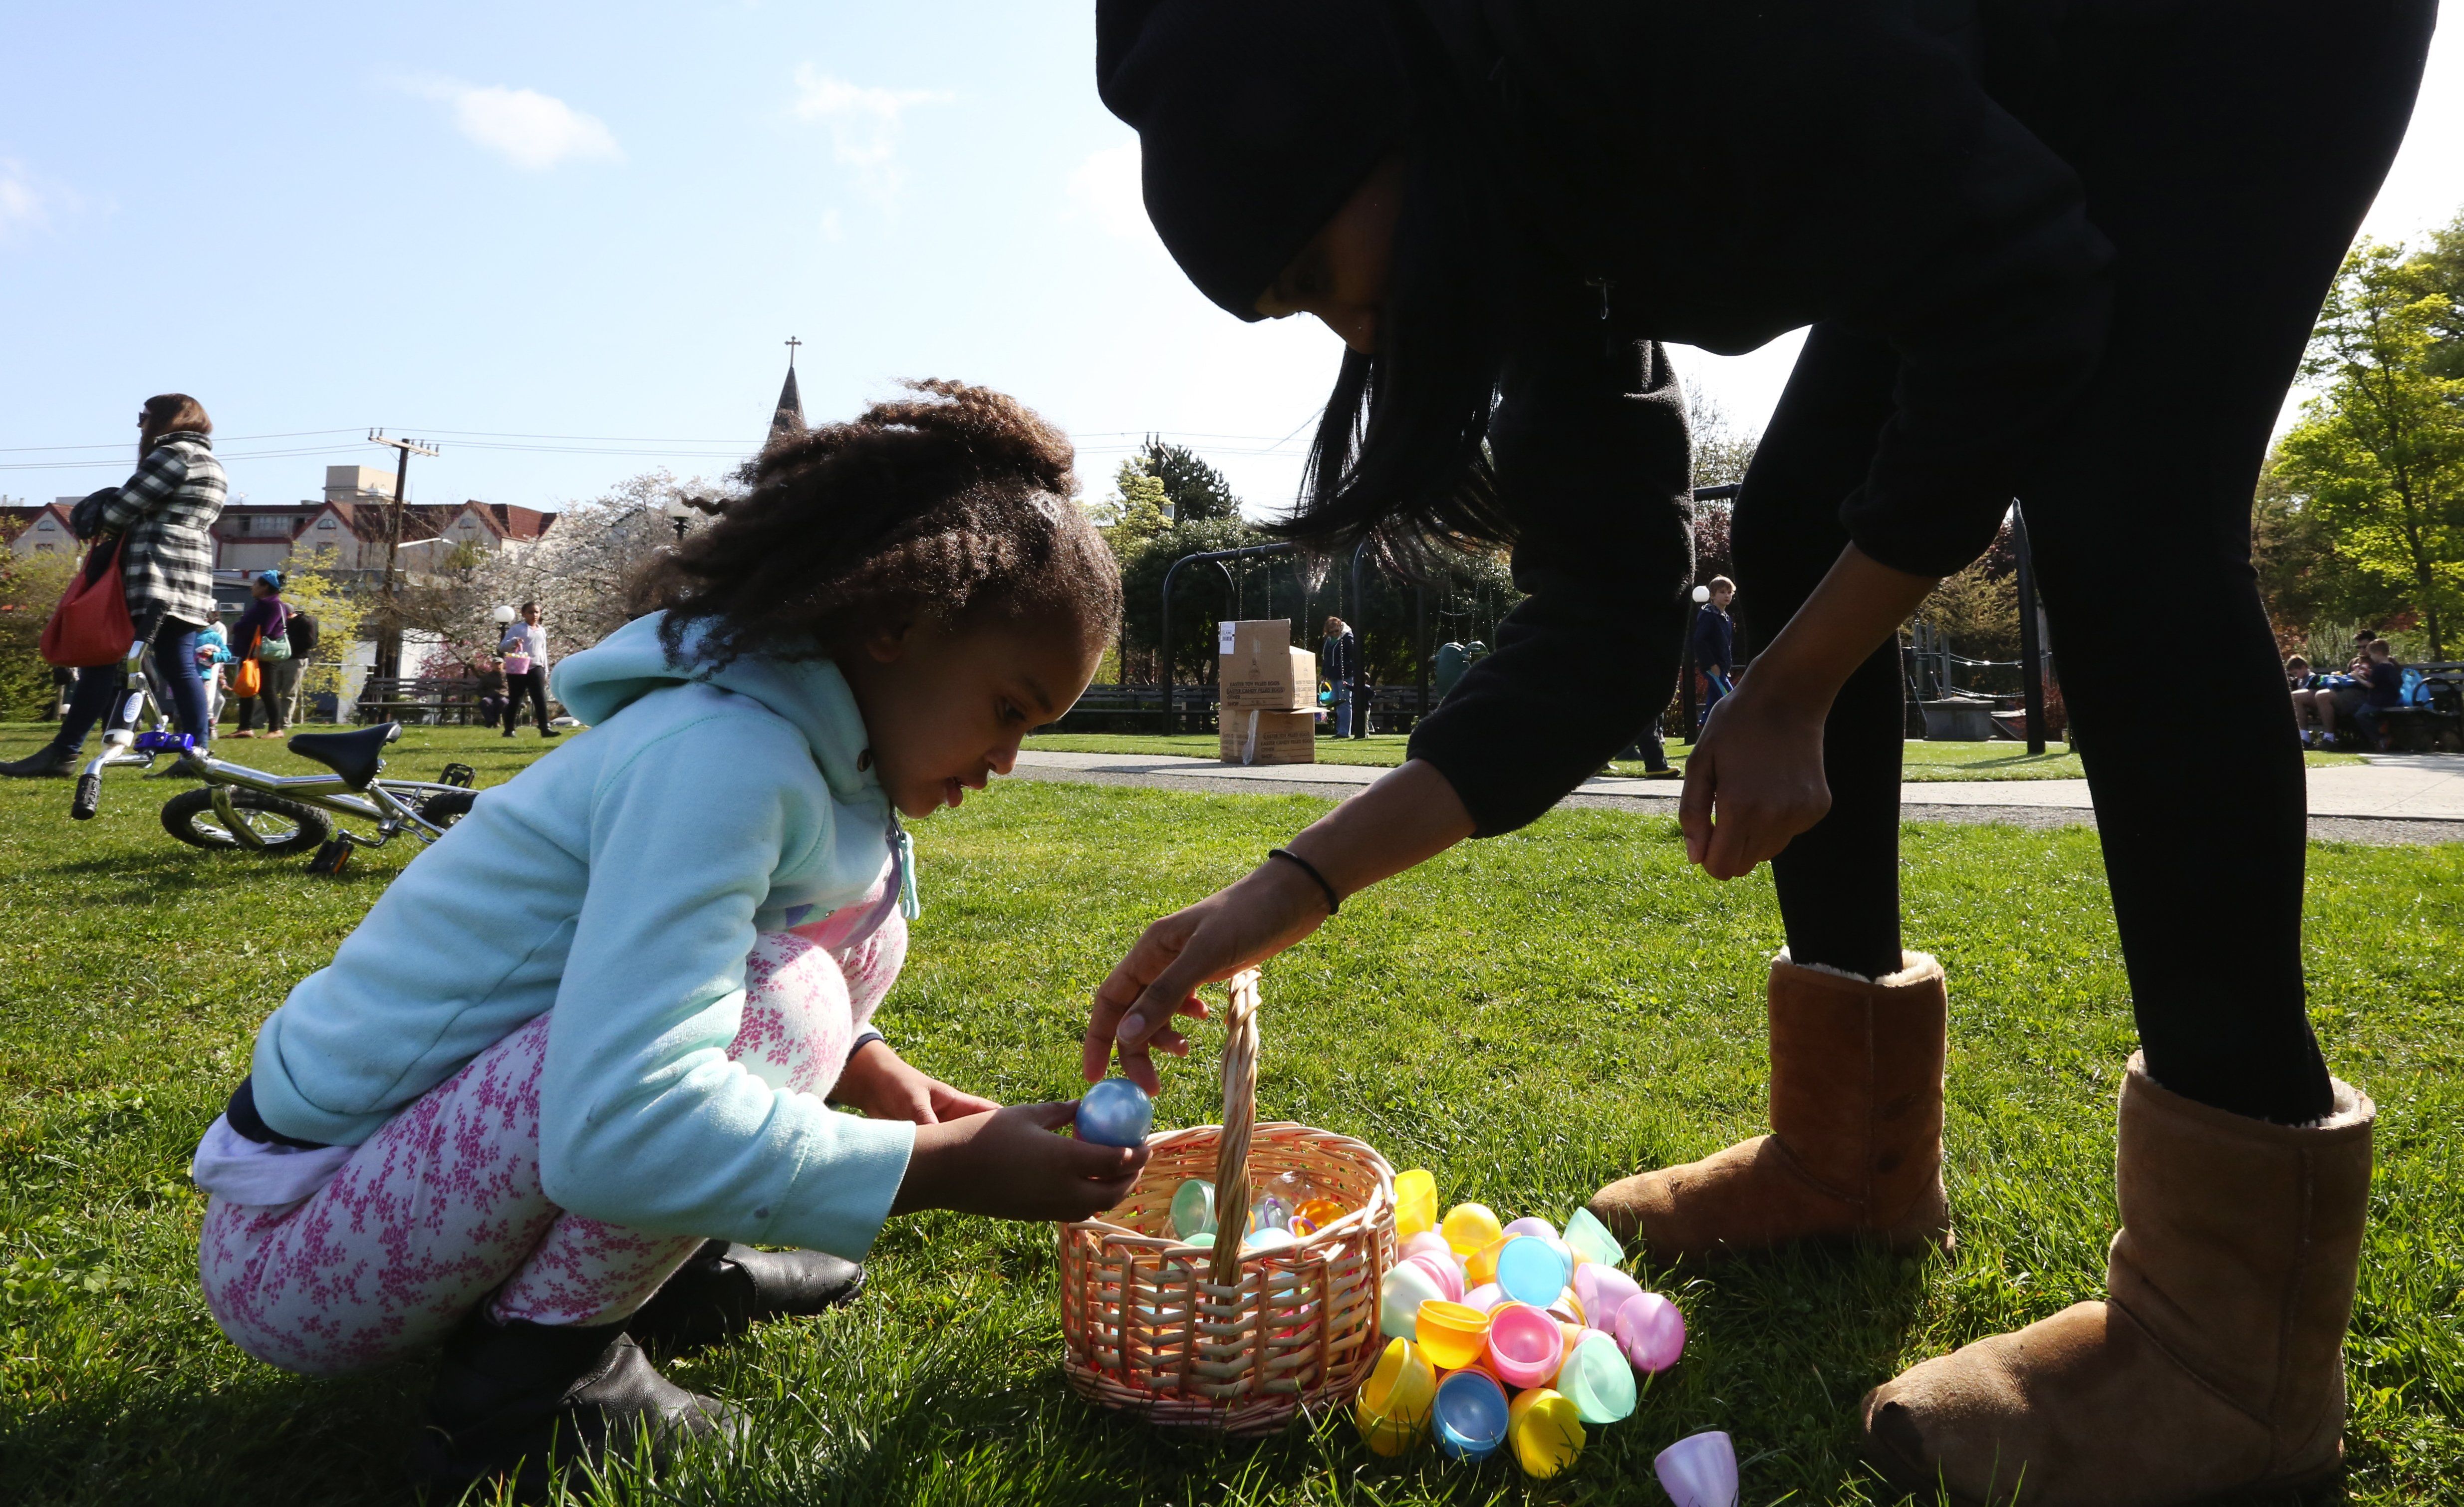 Easter weekend is hoppin' with egg hunts, parade fun